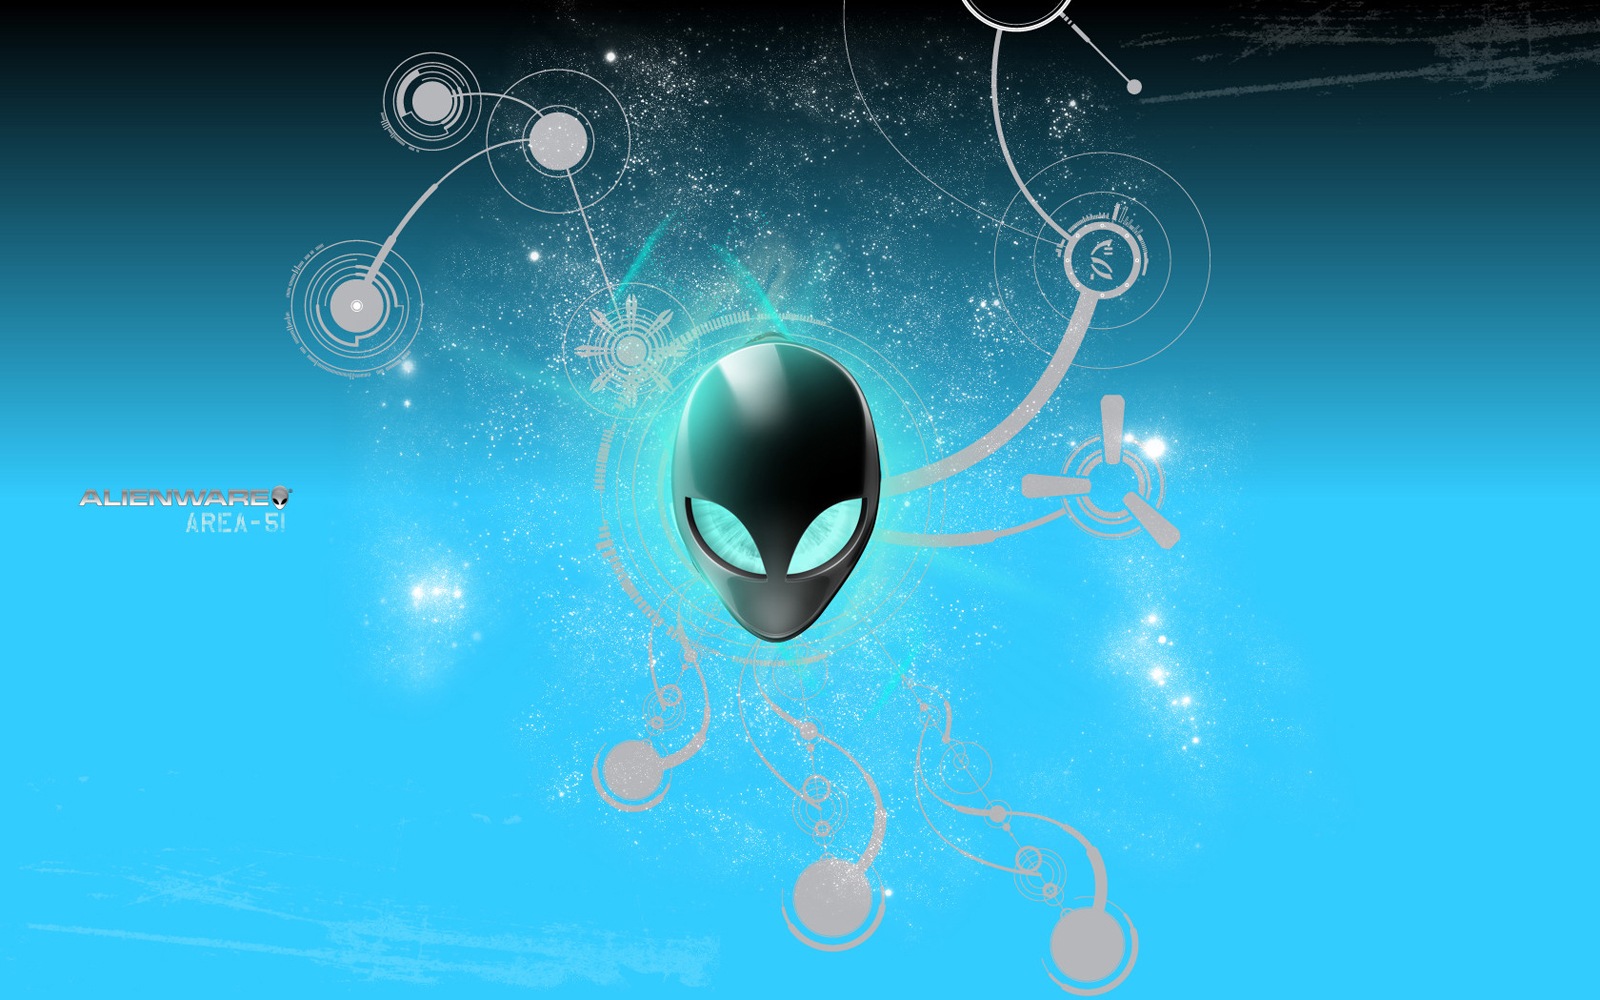 Alienware Logos and HD Wallpapers| HD Wallpapers ,Backgrounds ,Photos